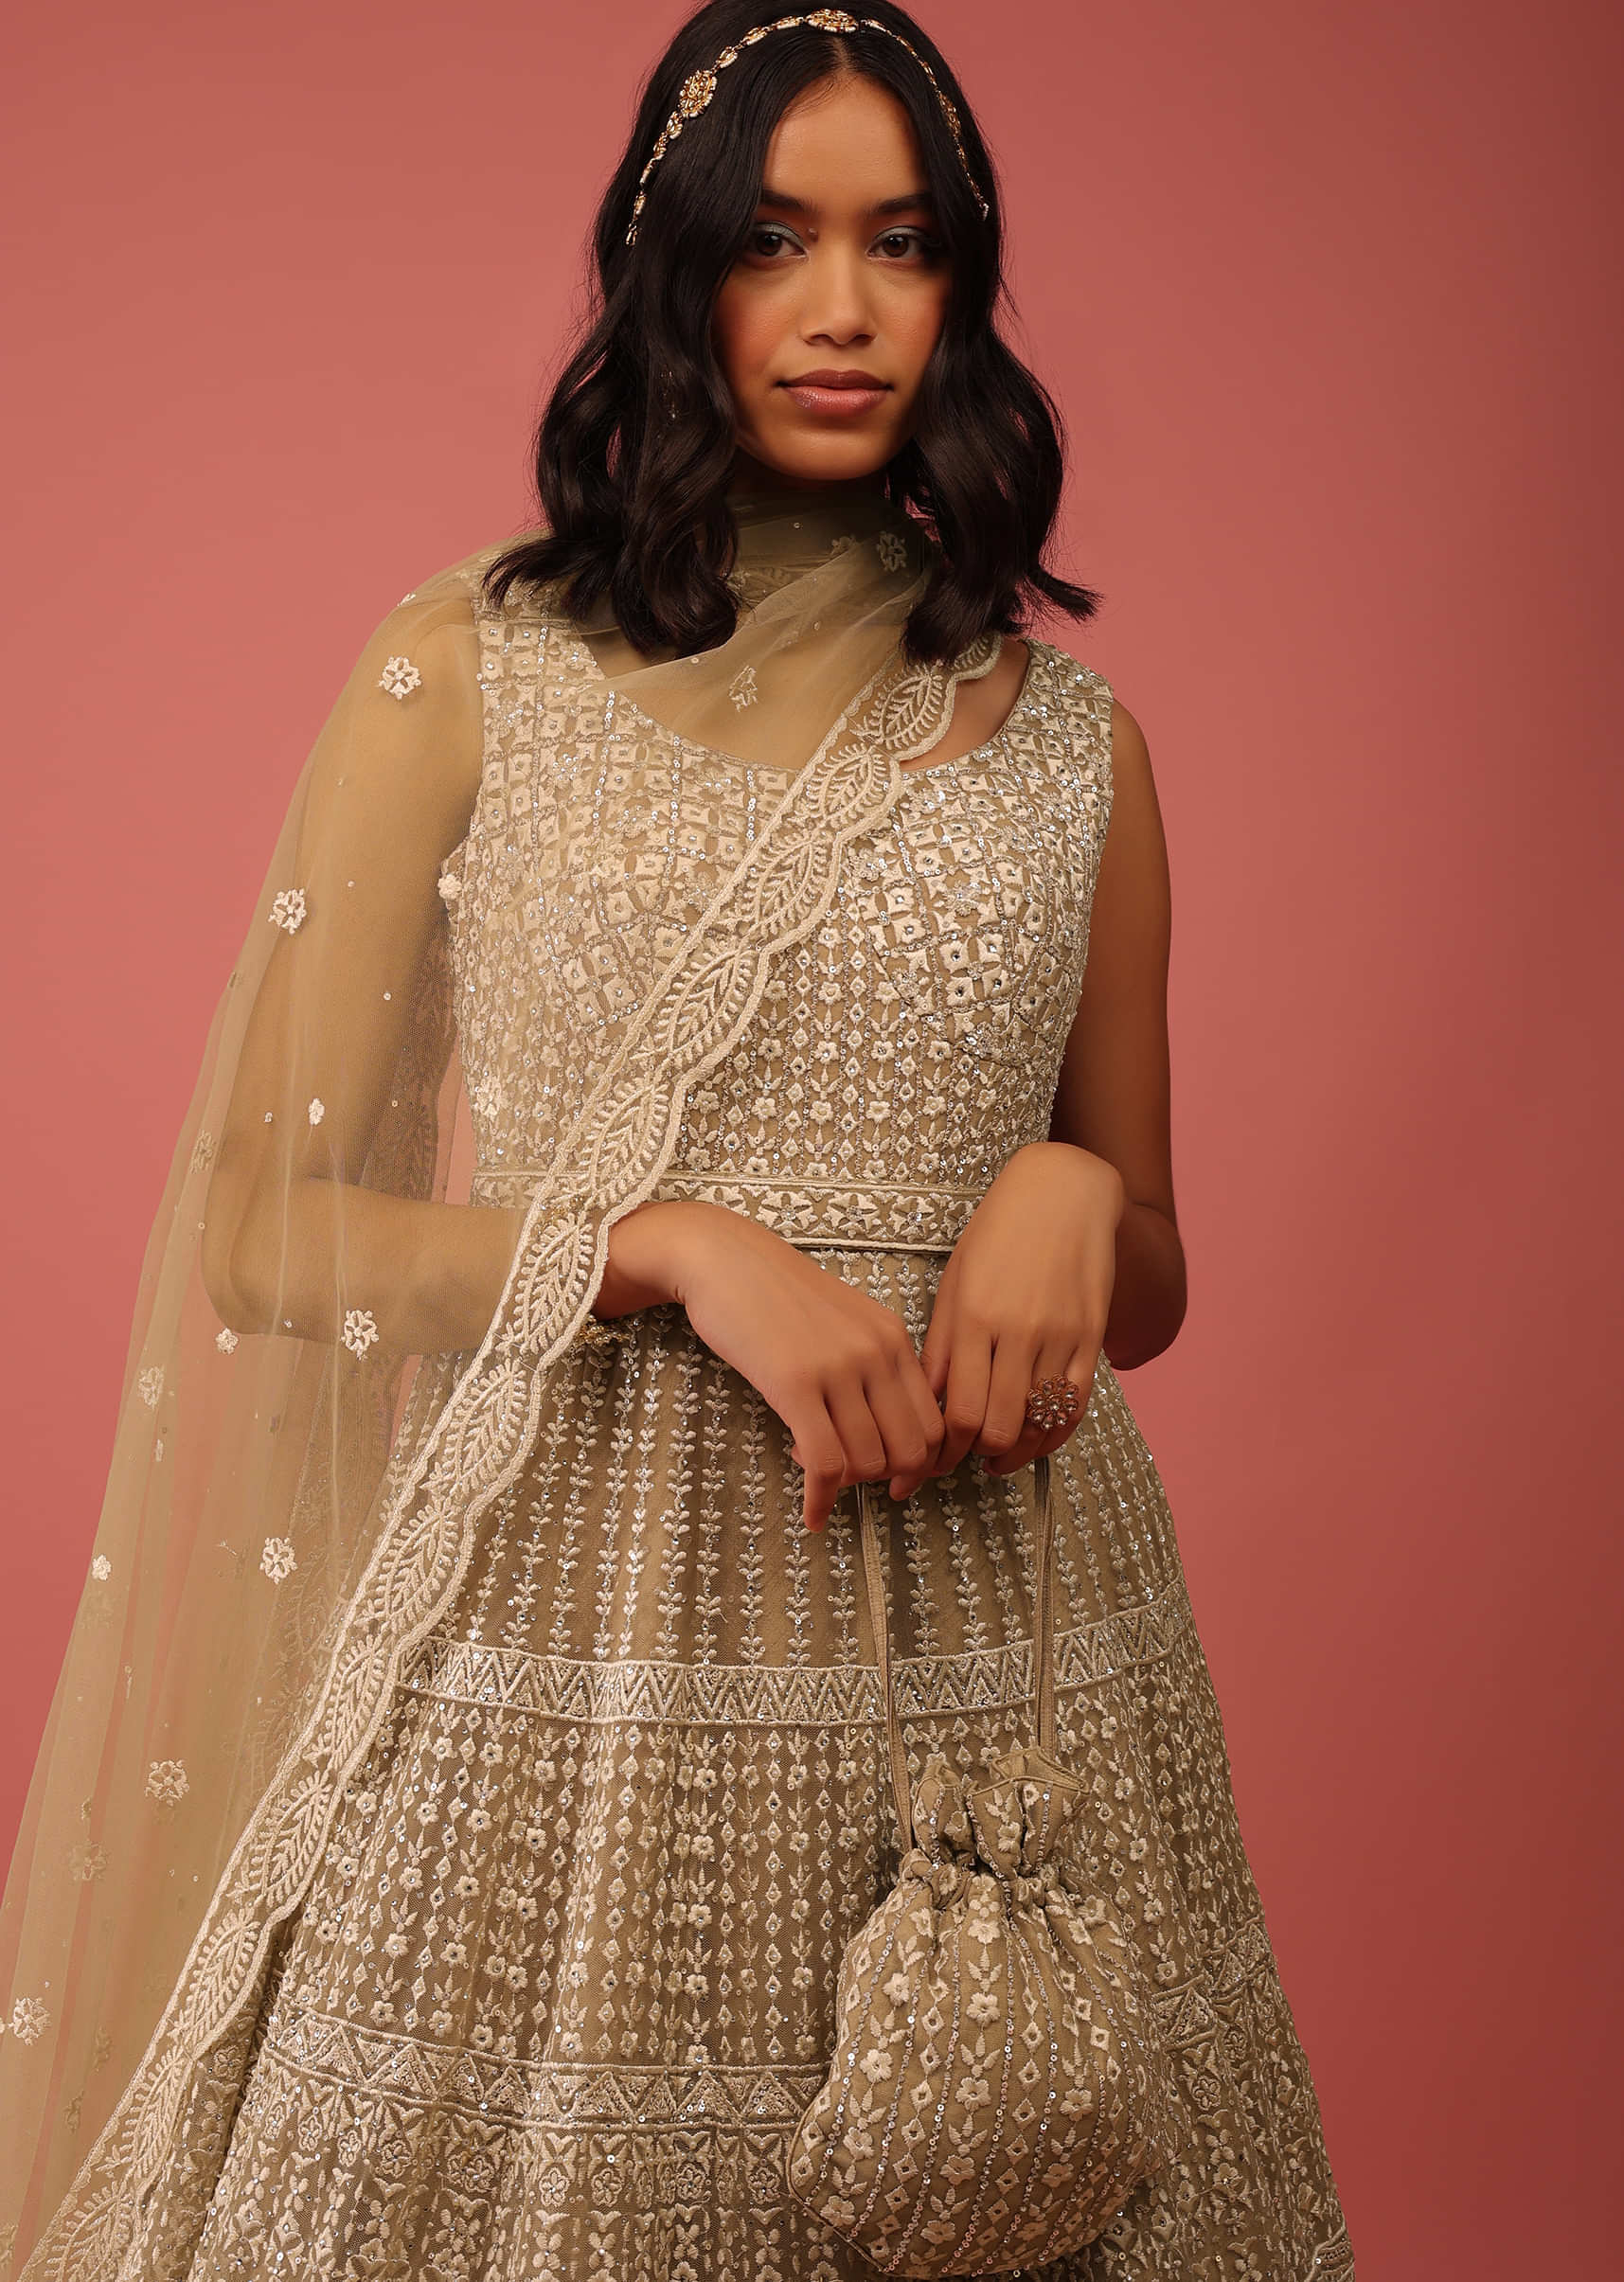 Beige Anarkali Suit In Net With Resham Embroidery And Mirror Accents